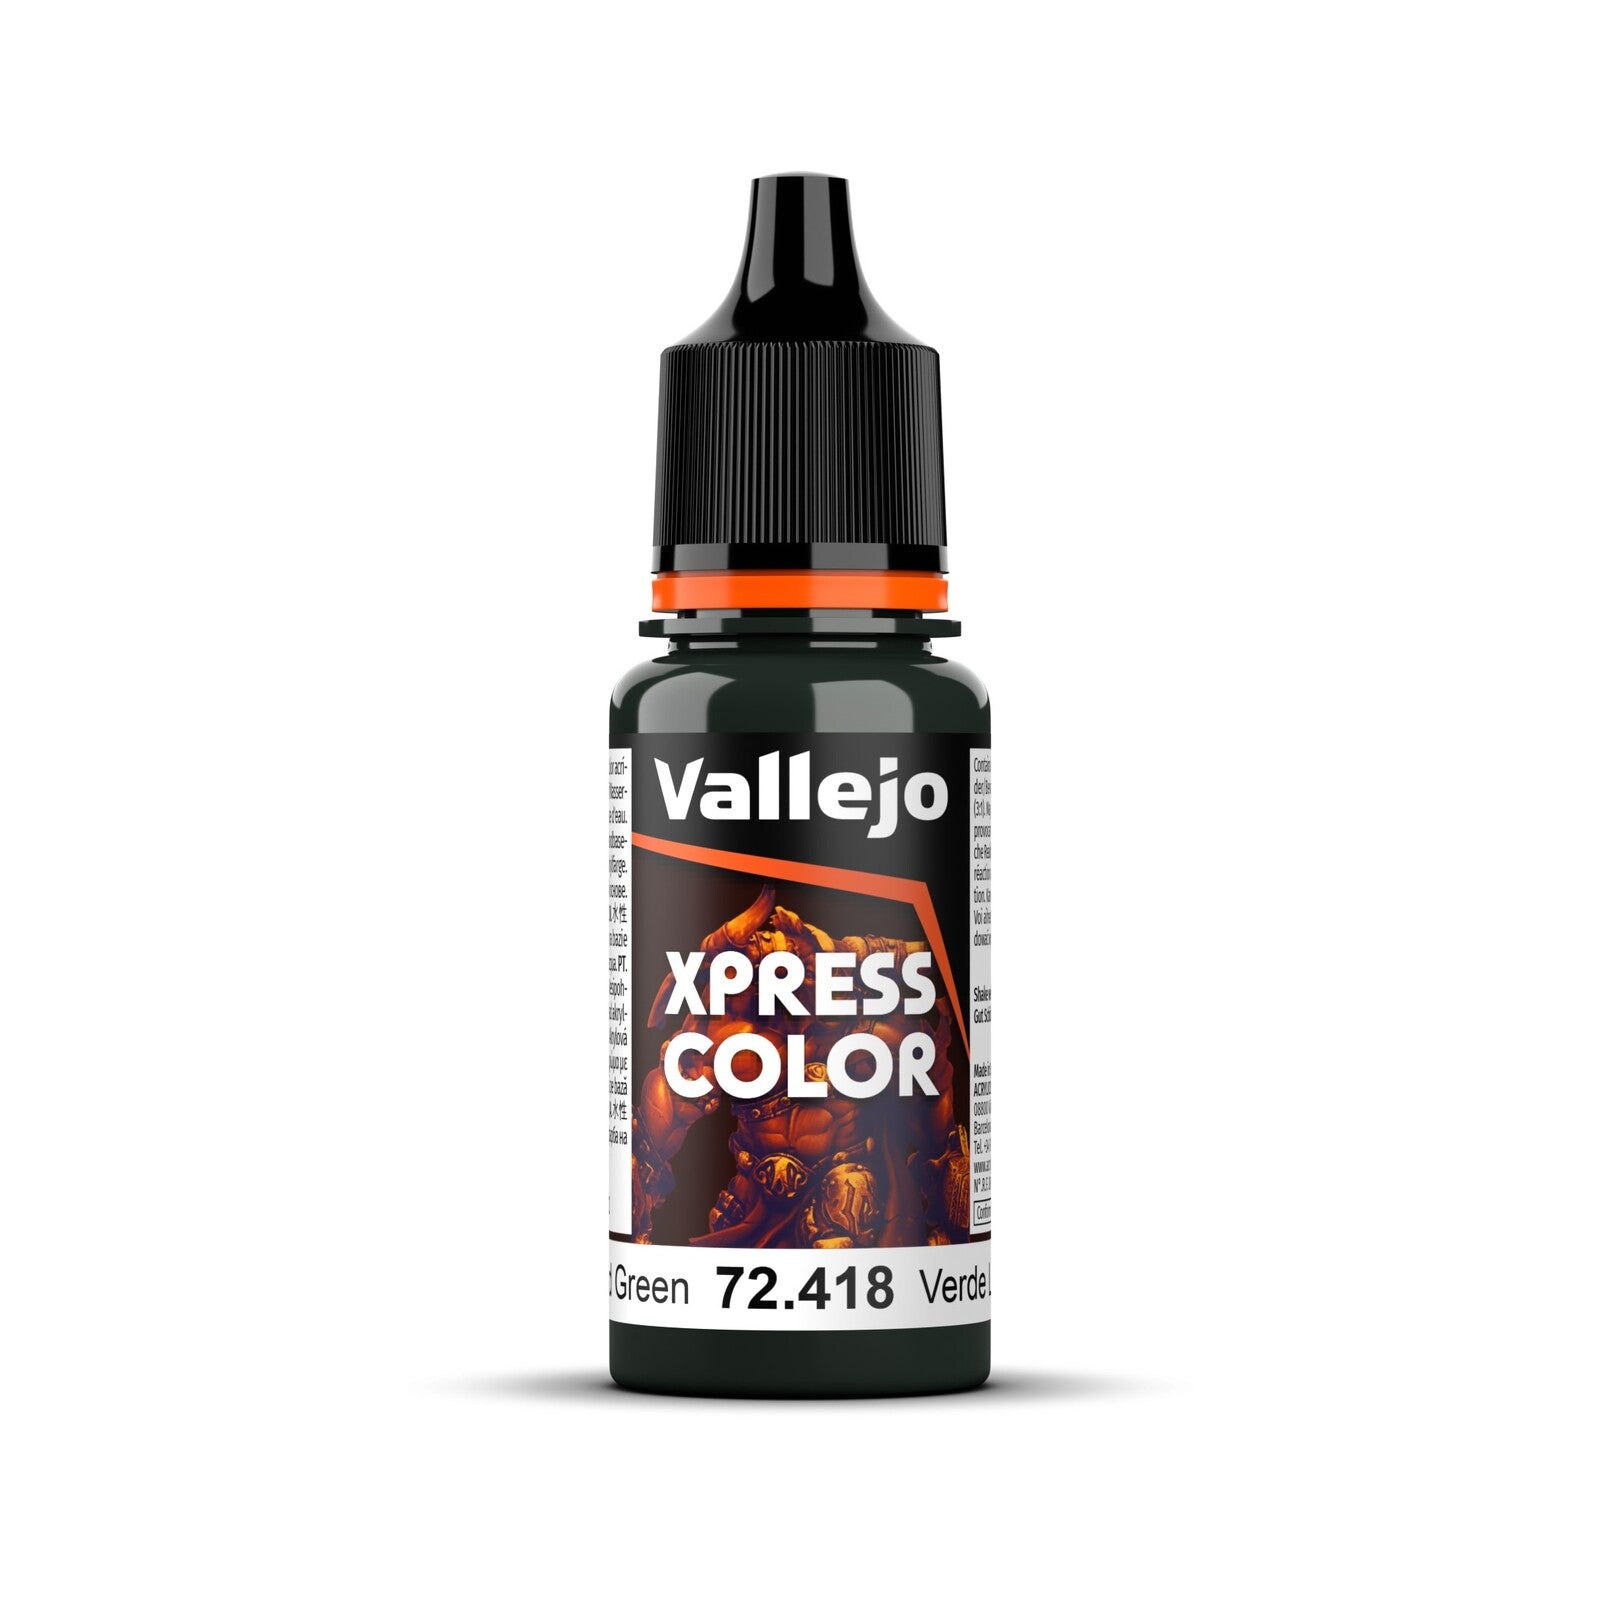 Vallejo Game Colour Xpress Color Lizard Green 18ml Acrylic Paint - New Formulation